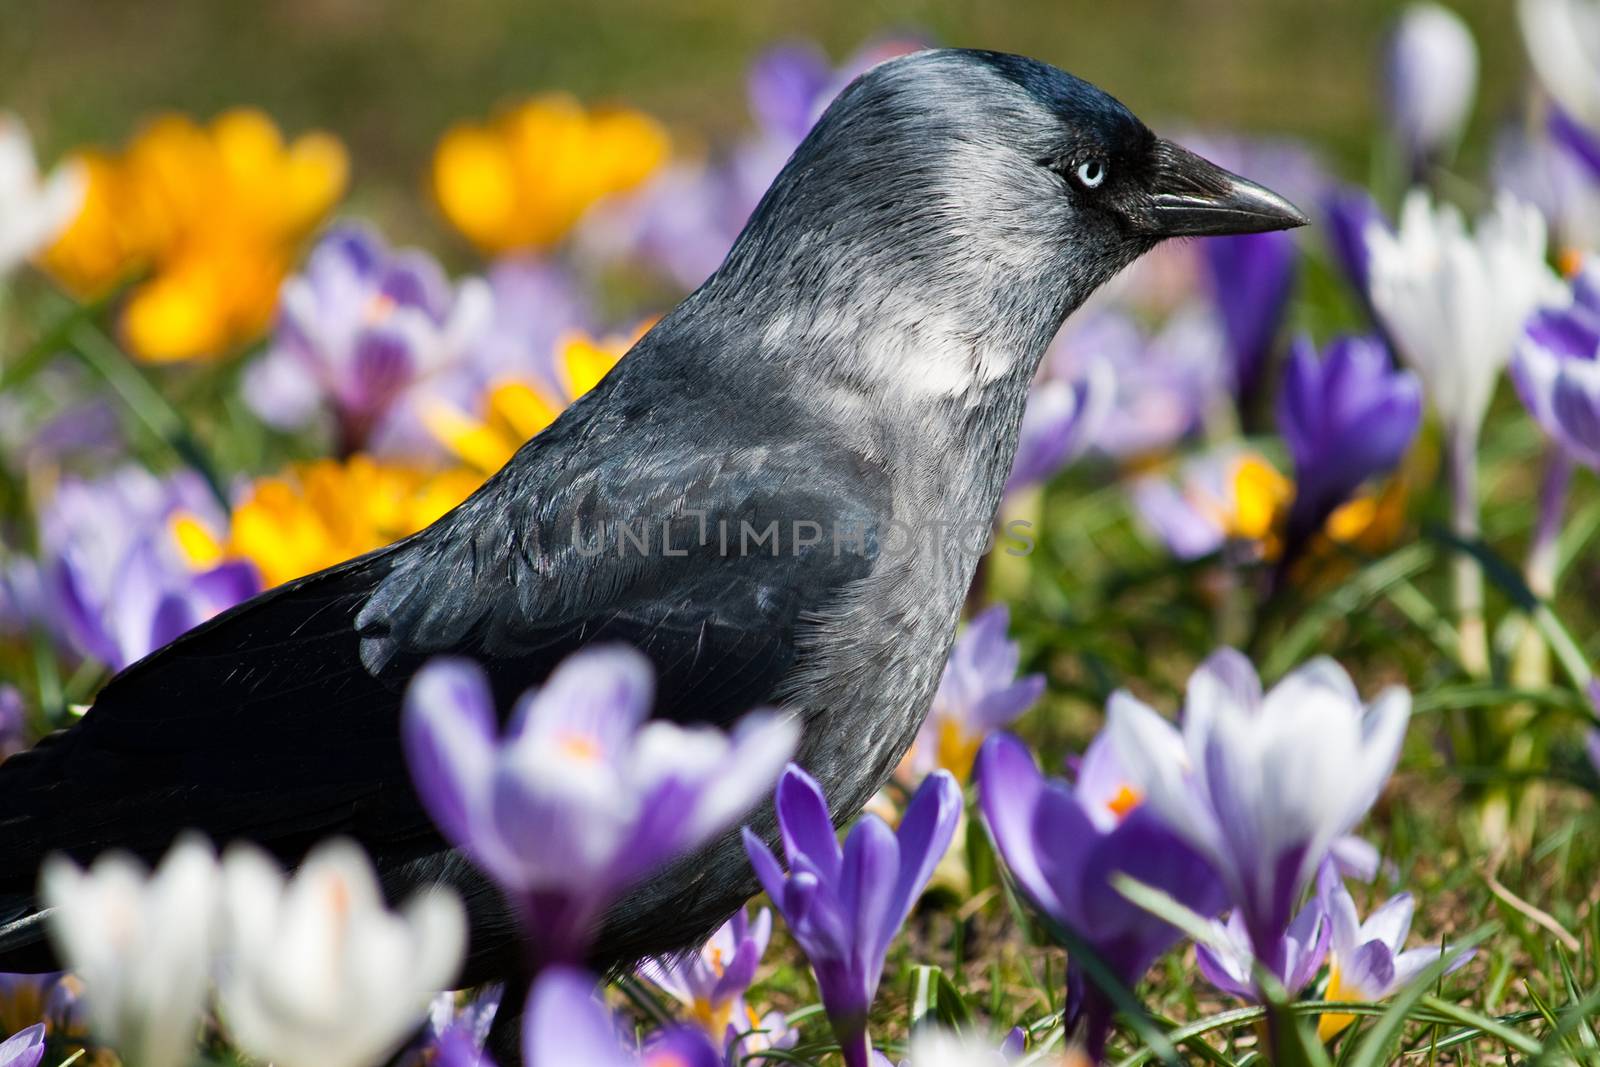 Crow in the flower bed with crocuses